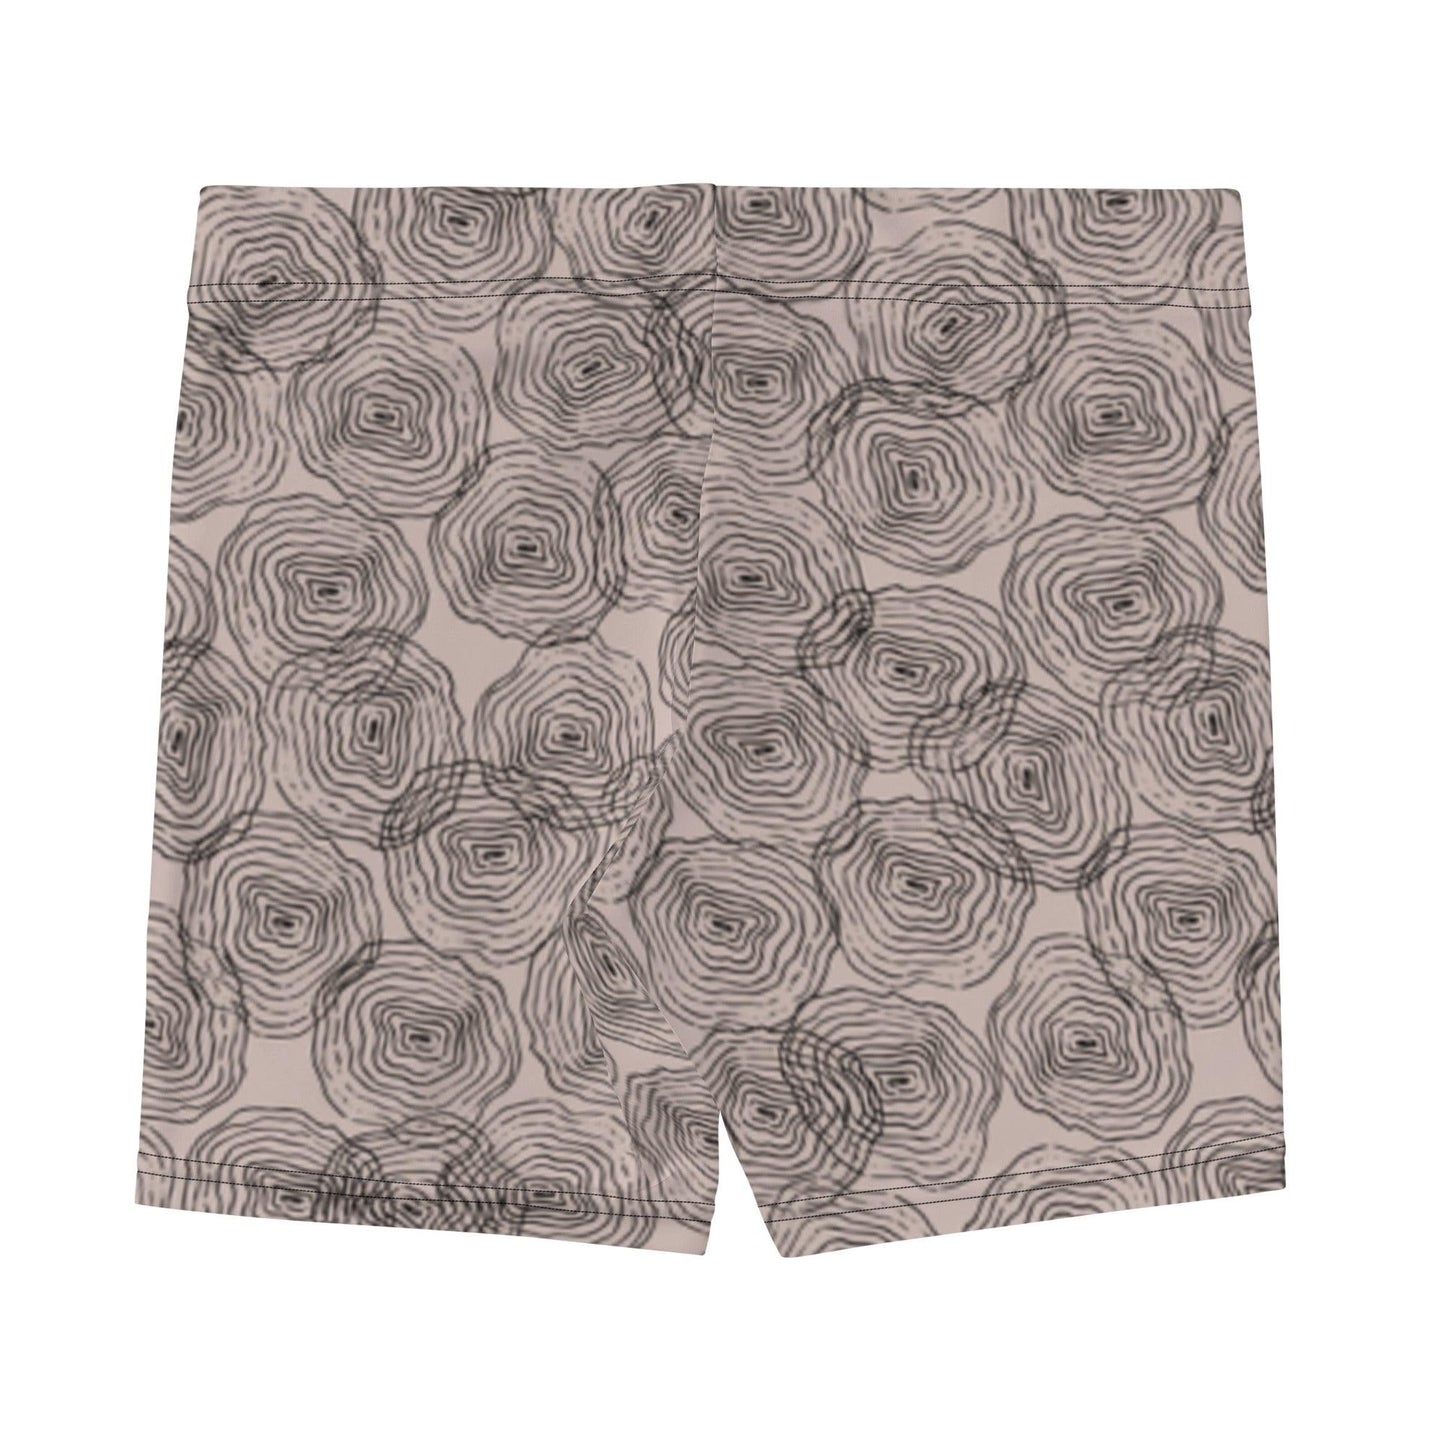 Ripple in Gray All Day Shorts - Solshine and Co